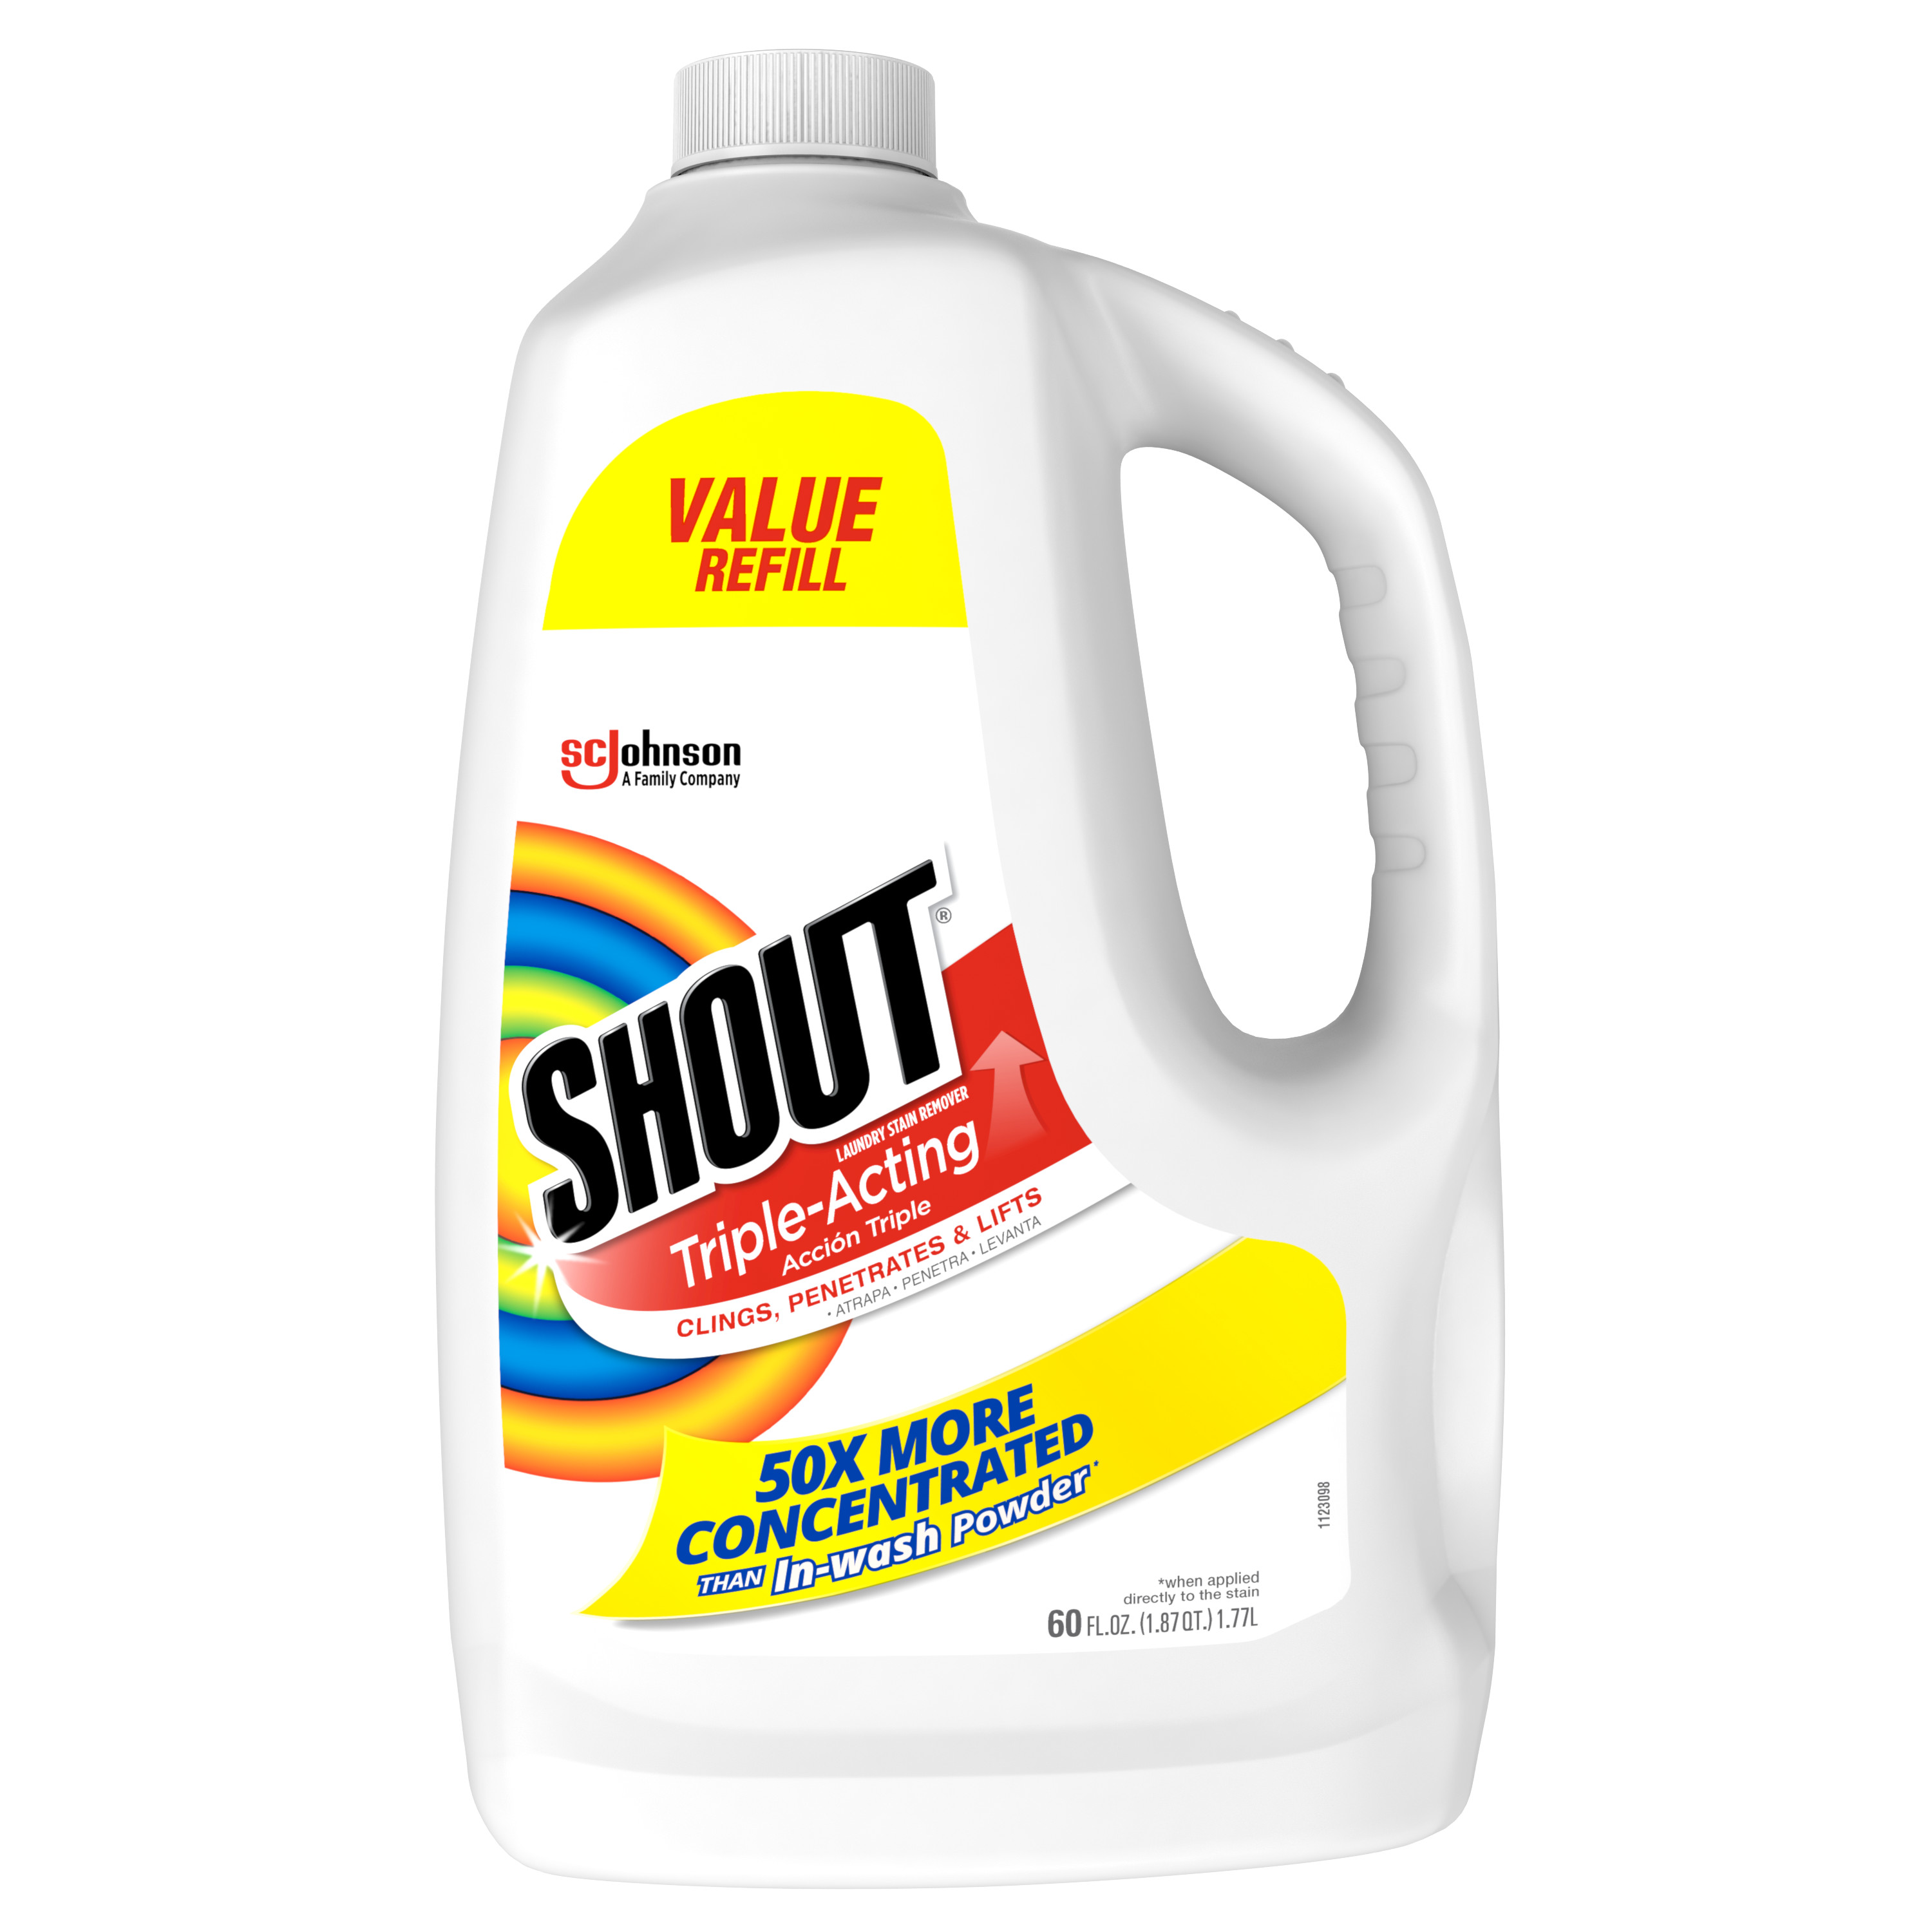 Shout Triple-Acting Refill, Laundry Stain Remover, 60 Ounce - image 1 of 12